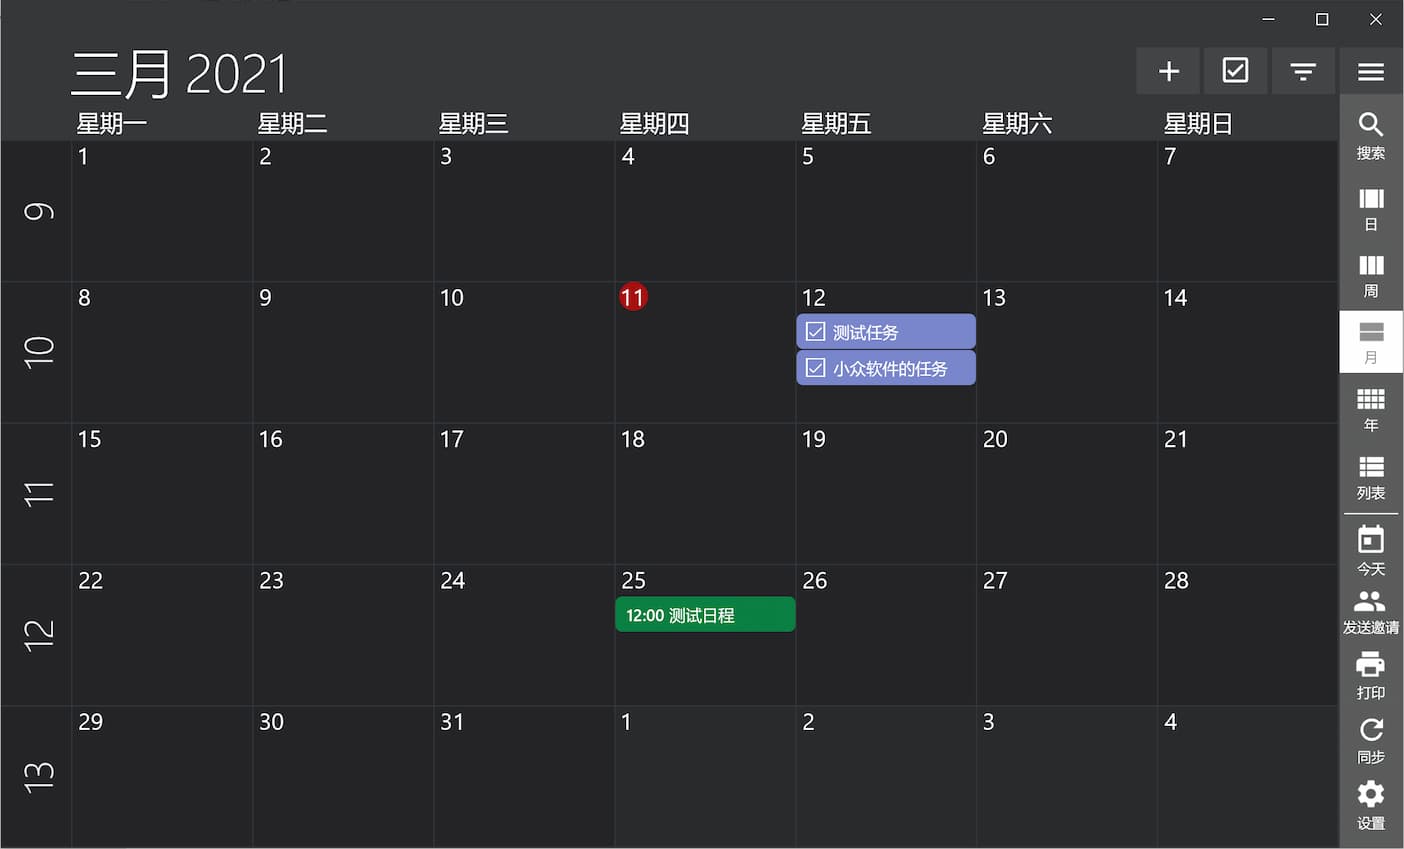 One Calenda‪r‬ - 支持 12 种日历账户，可显示任务的聚合型日历工具[Win/macOS/iPhone/Android]